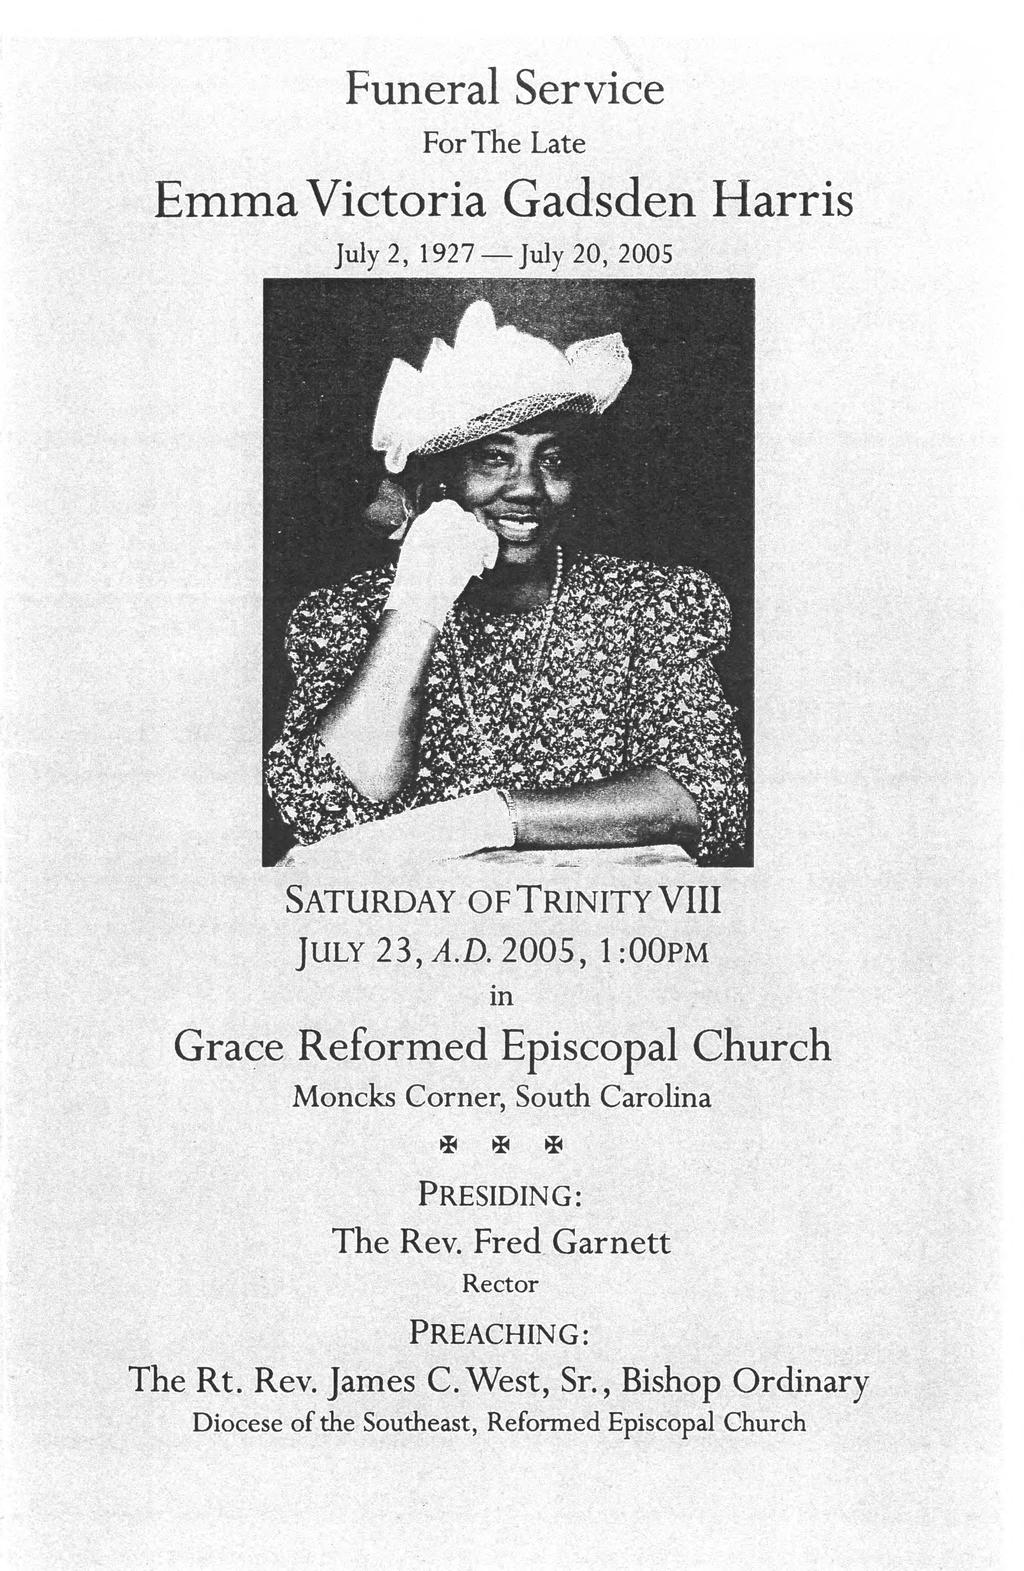 Funeral Service For The Late Emma Victoria Gadsden Harris July 2, 1927 July 20, 2005 SATURDAY OF TRINITY VIII JULY 23, AD.